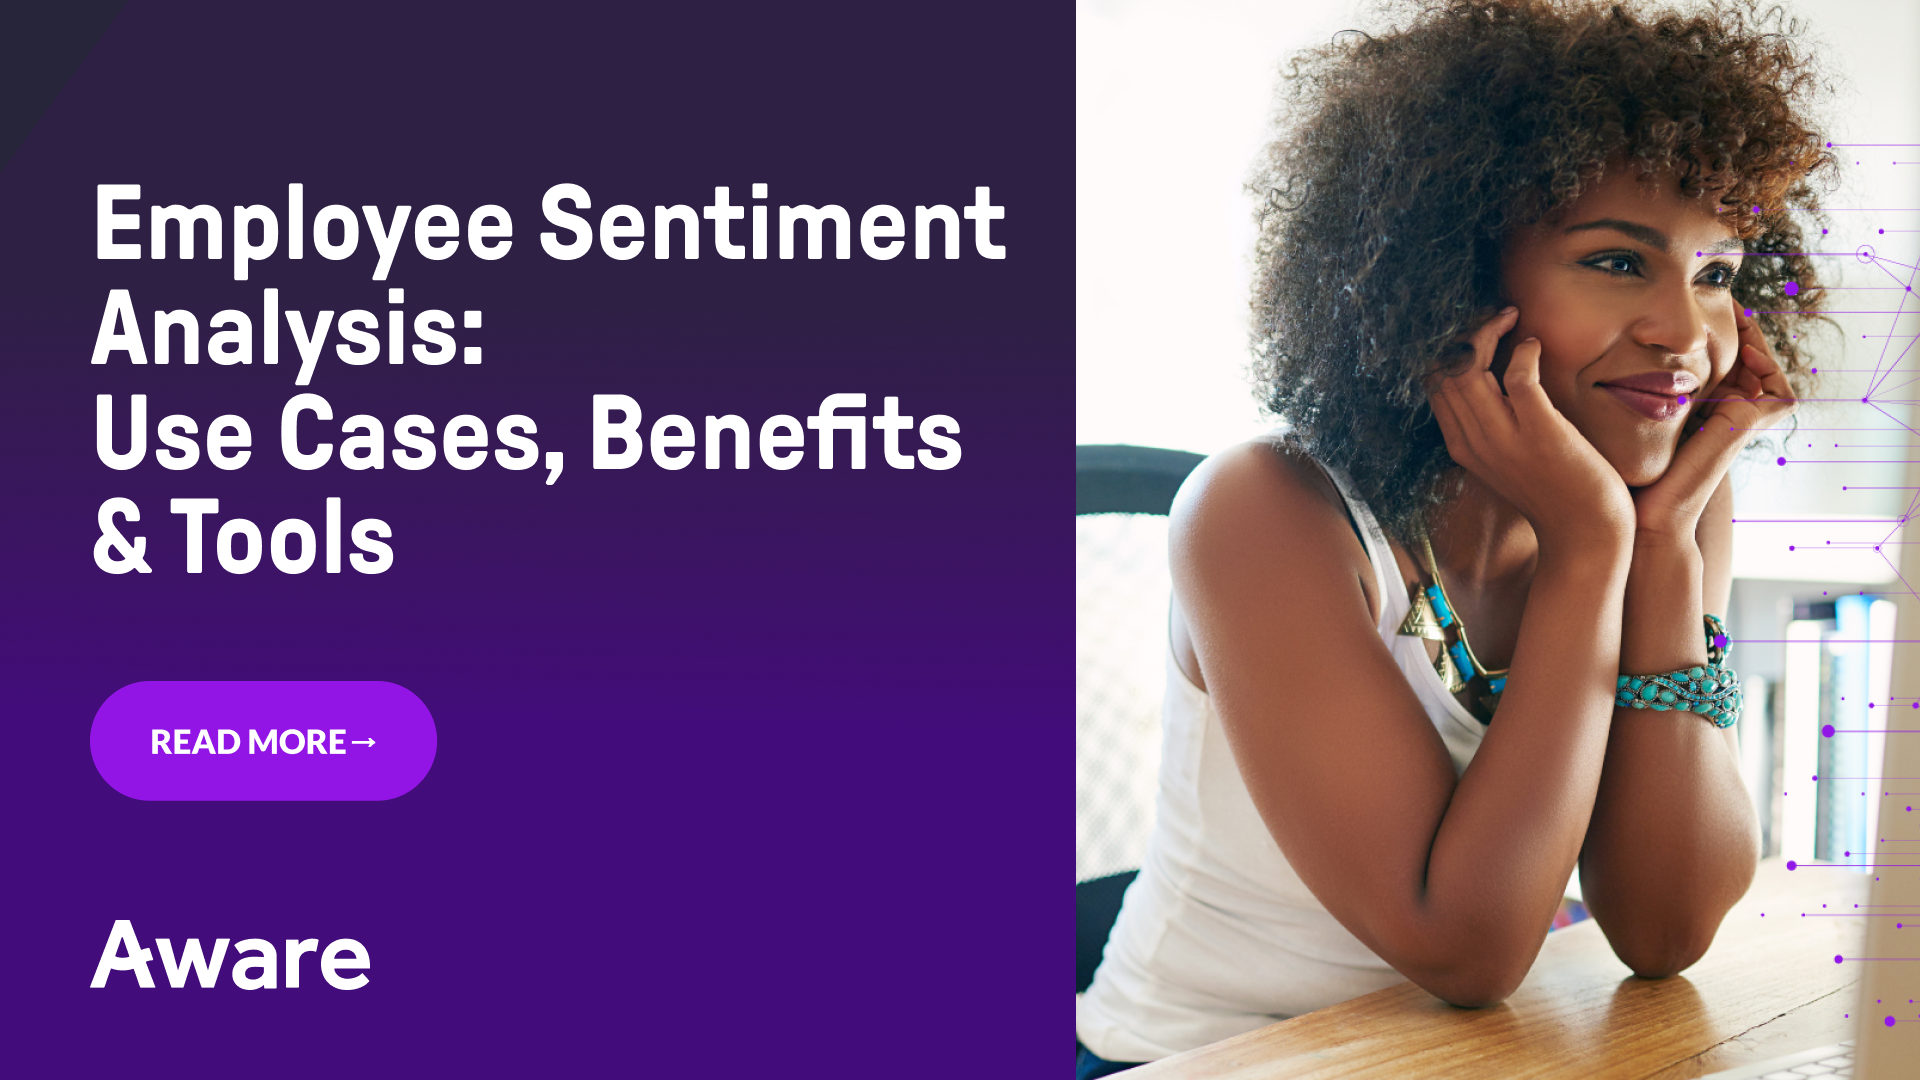 Employee Sentiment Analysis: Use Cases, Benefits & Tools